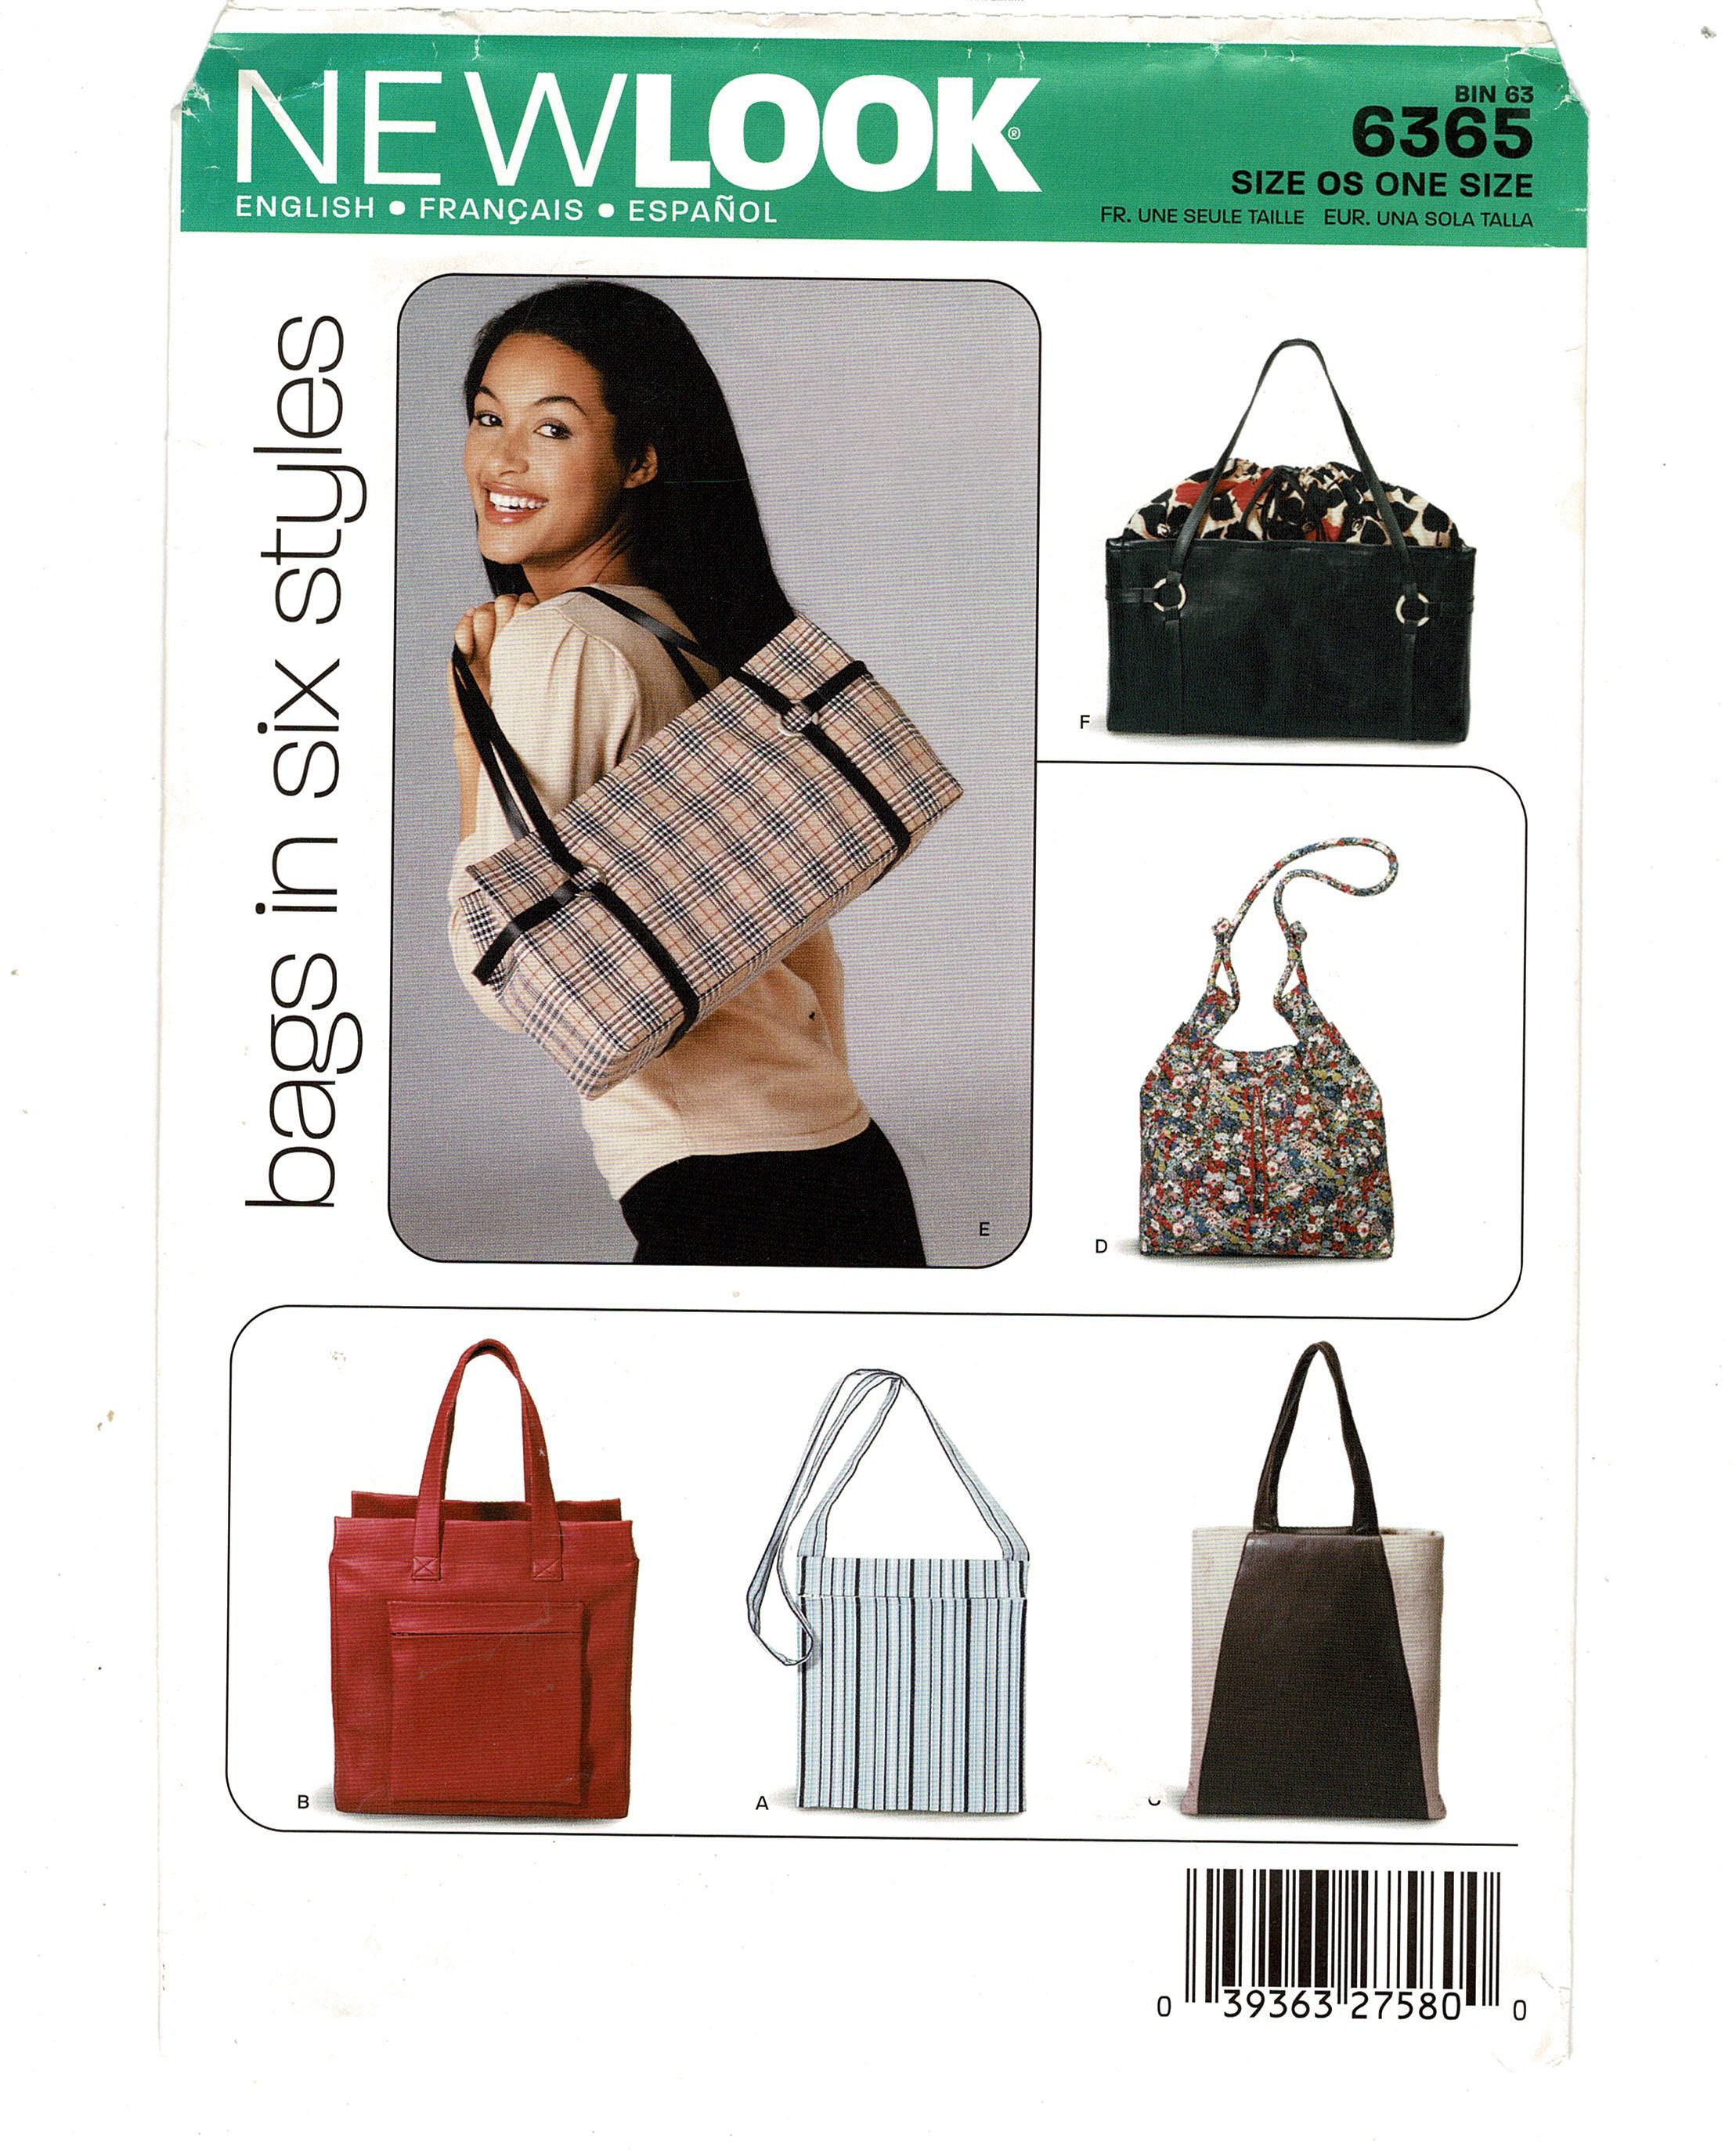 New Look Sewing Pattern 6365 6 Styles in Bags or Purses | eBay